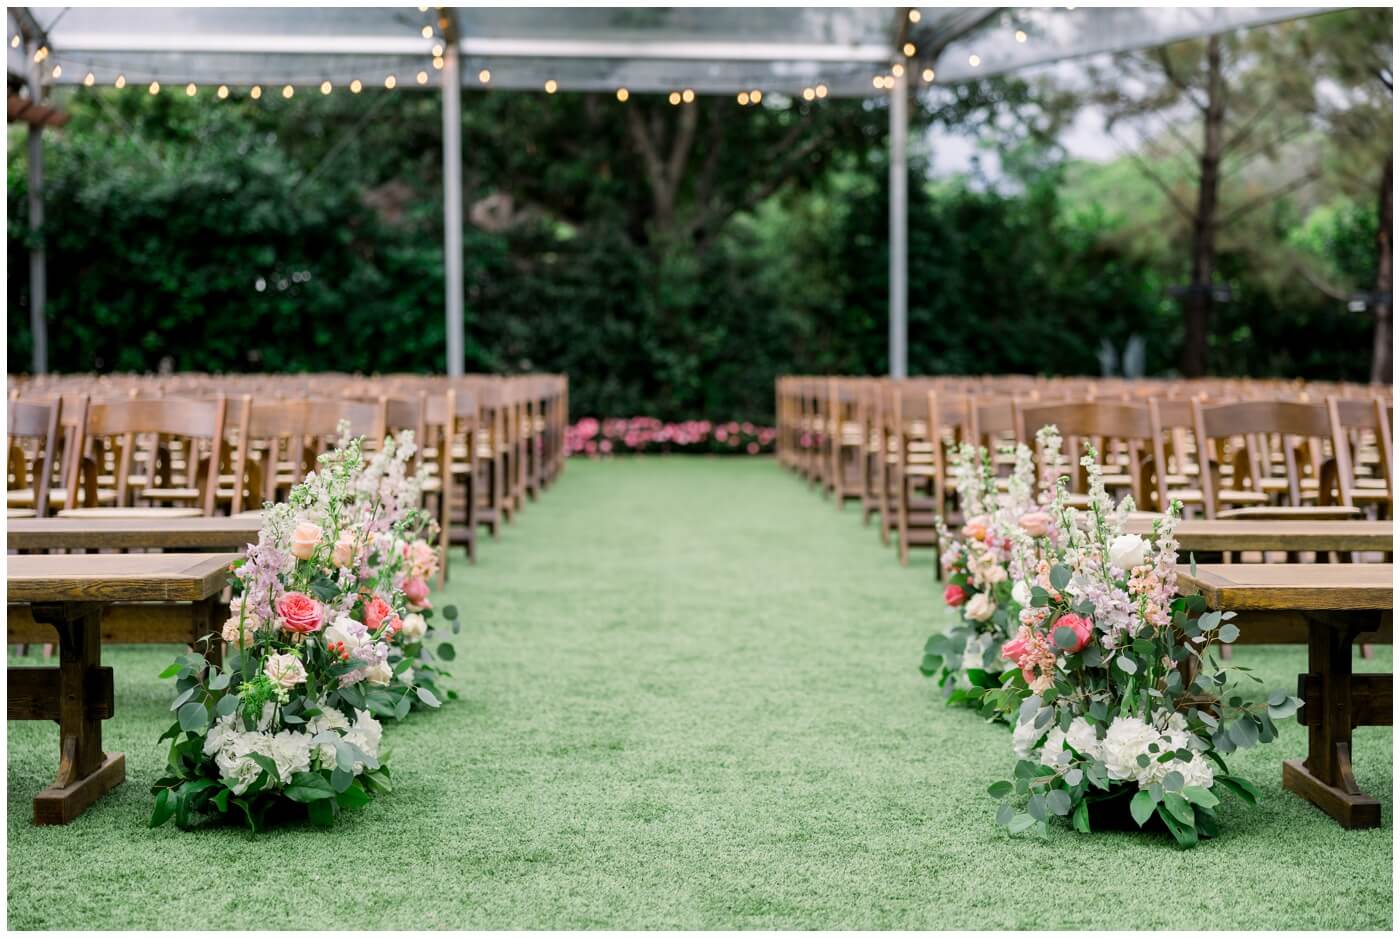 Ceremony details at Hotel Drover